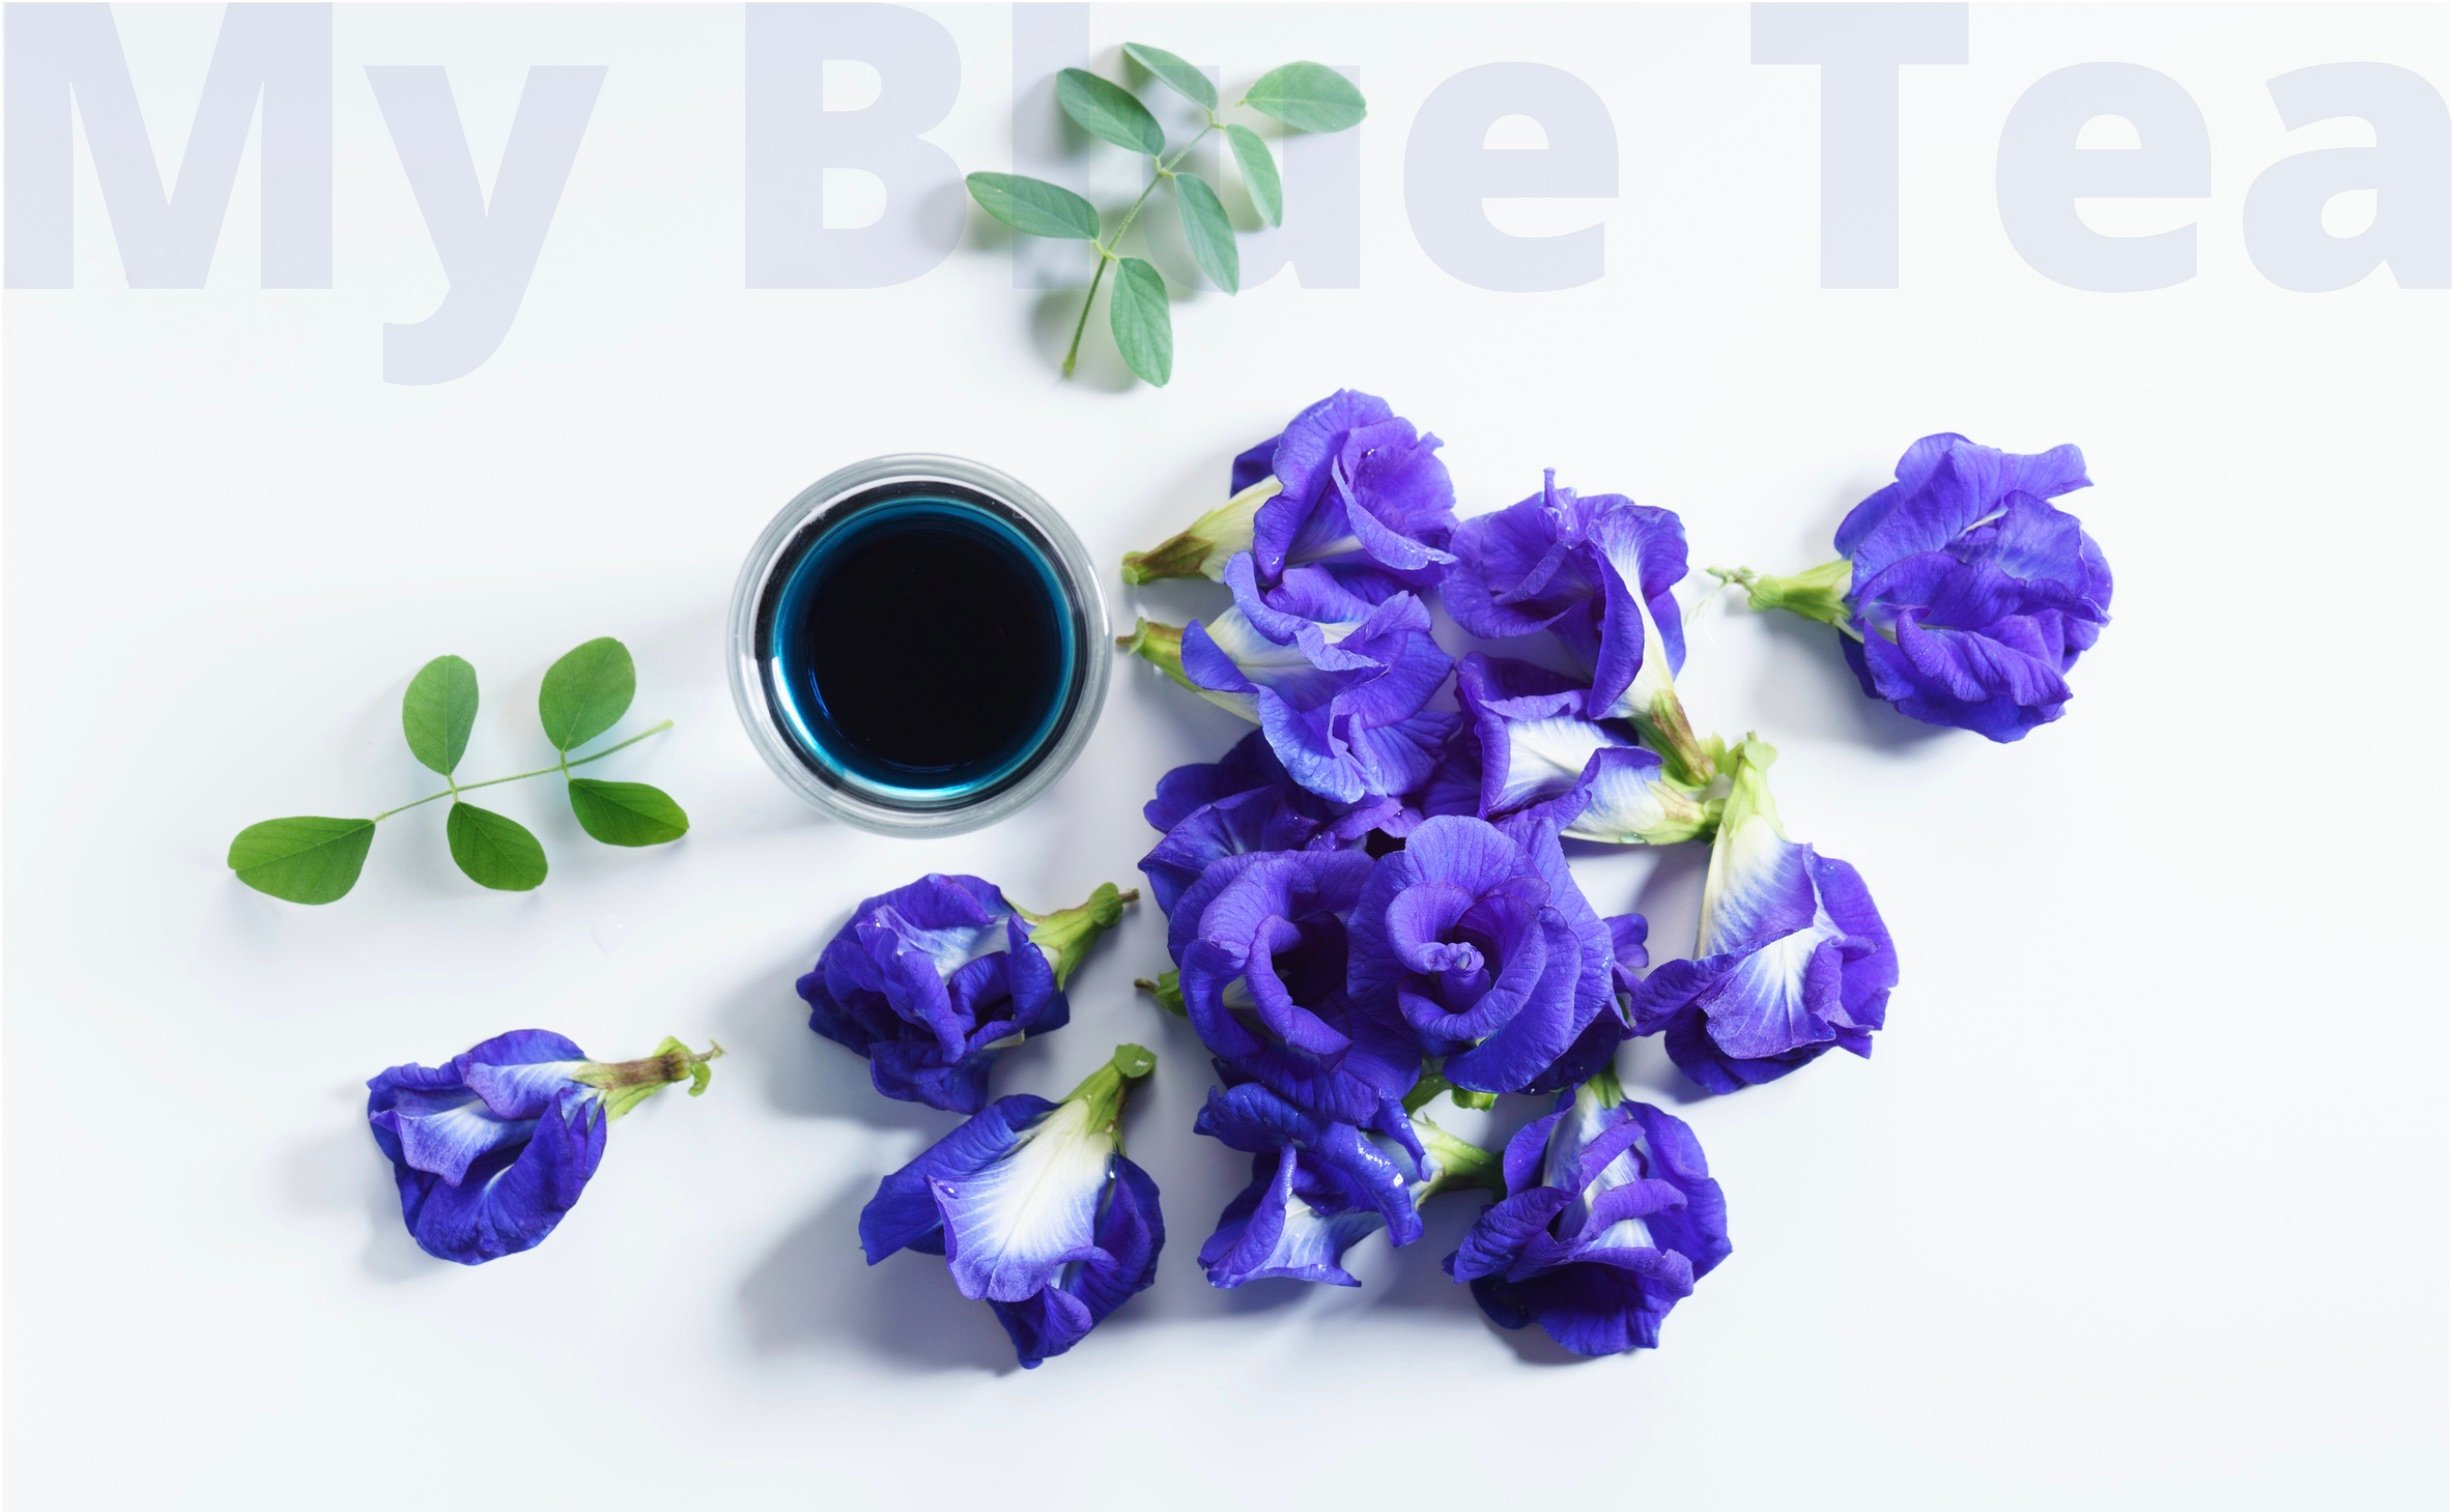 Butterfly Pea Flower Tea - Foodie's Fun - This That More